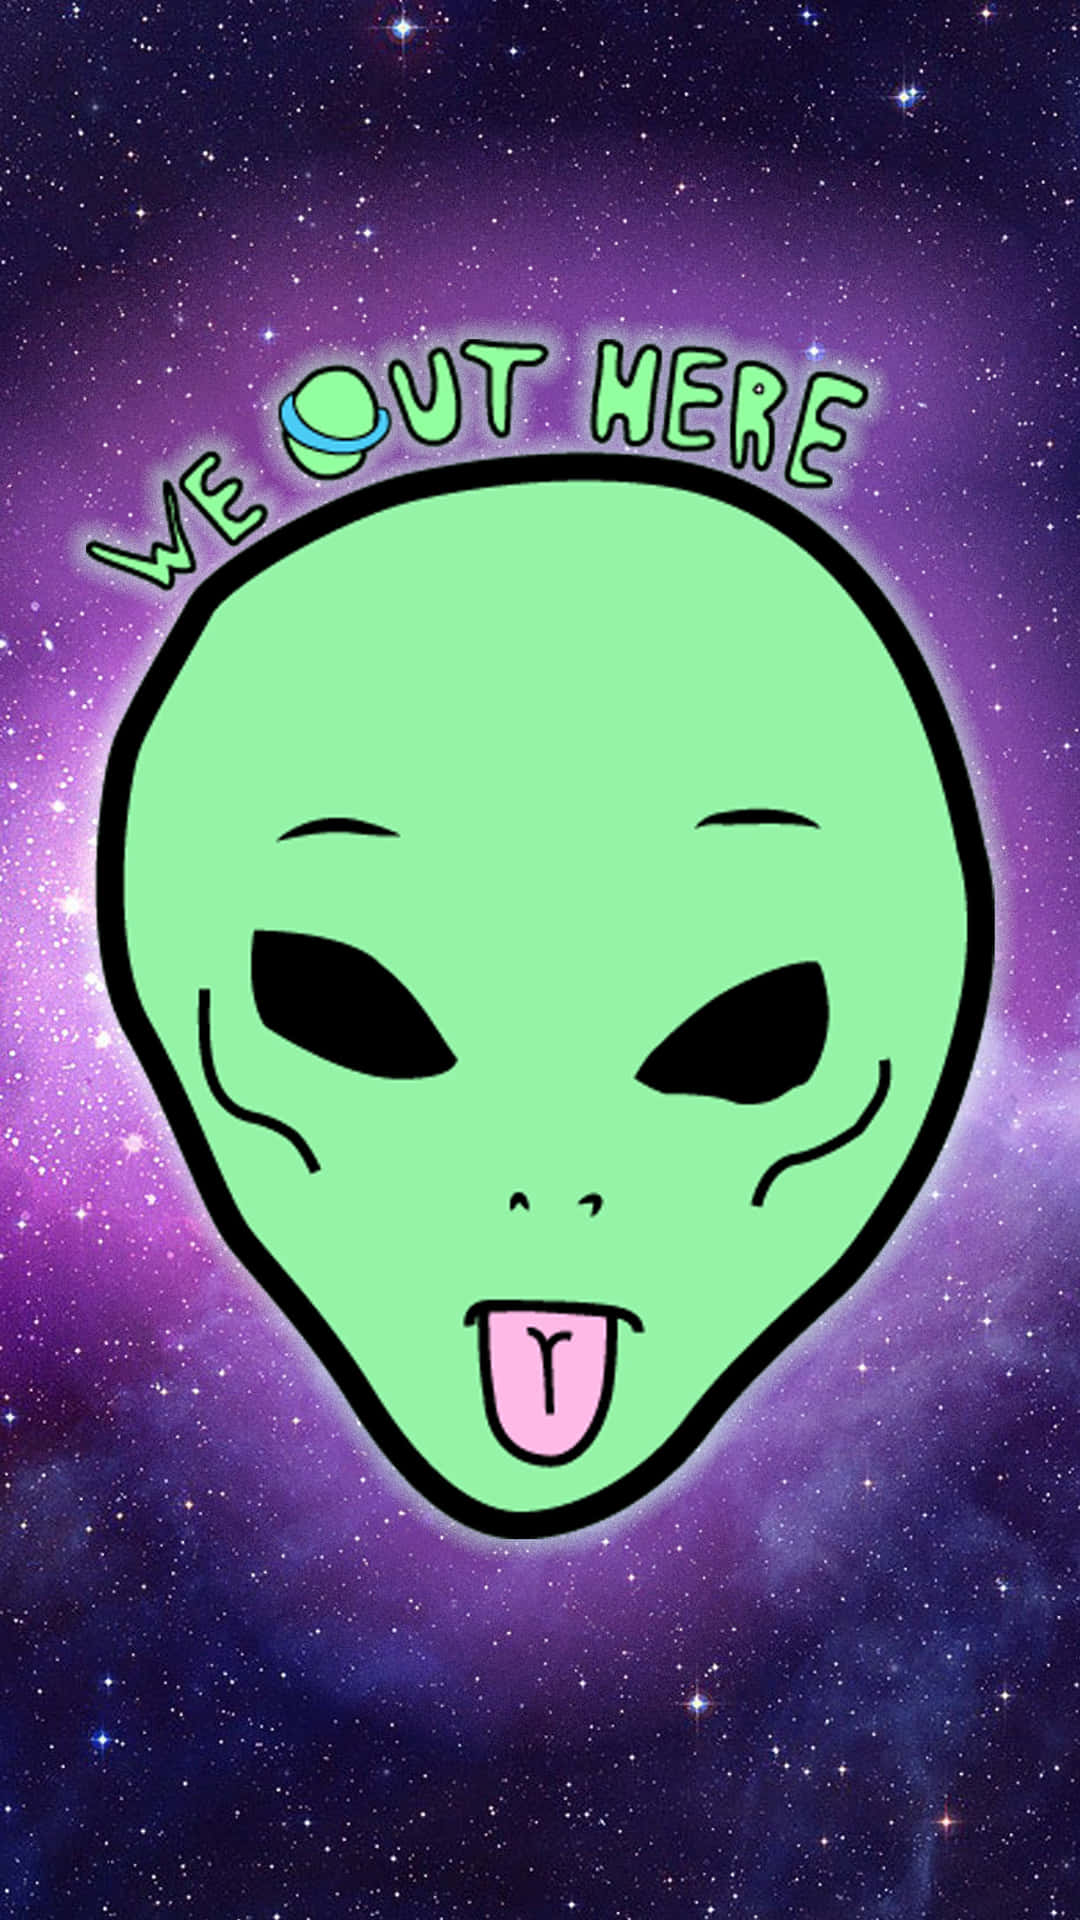 We Out Here - A Green Alien With Tongue Sticking Out Background